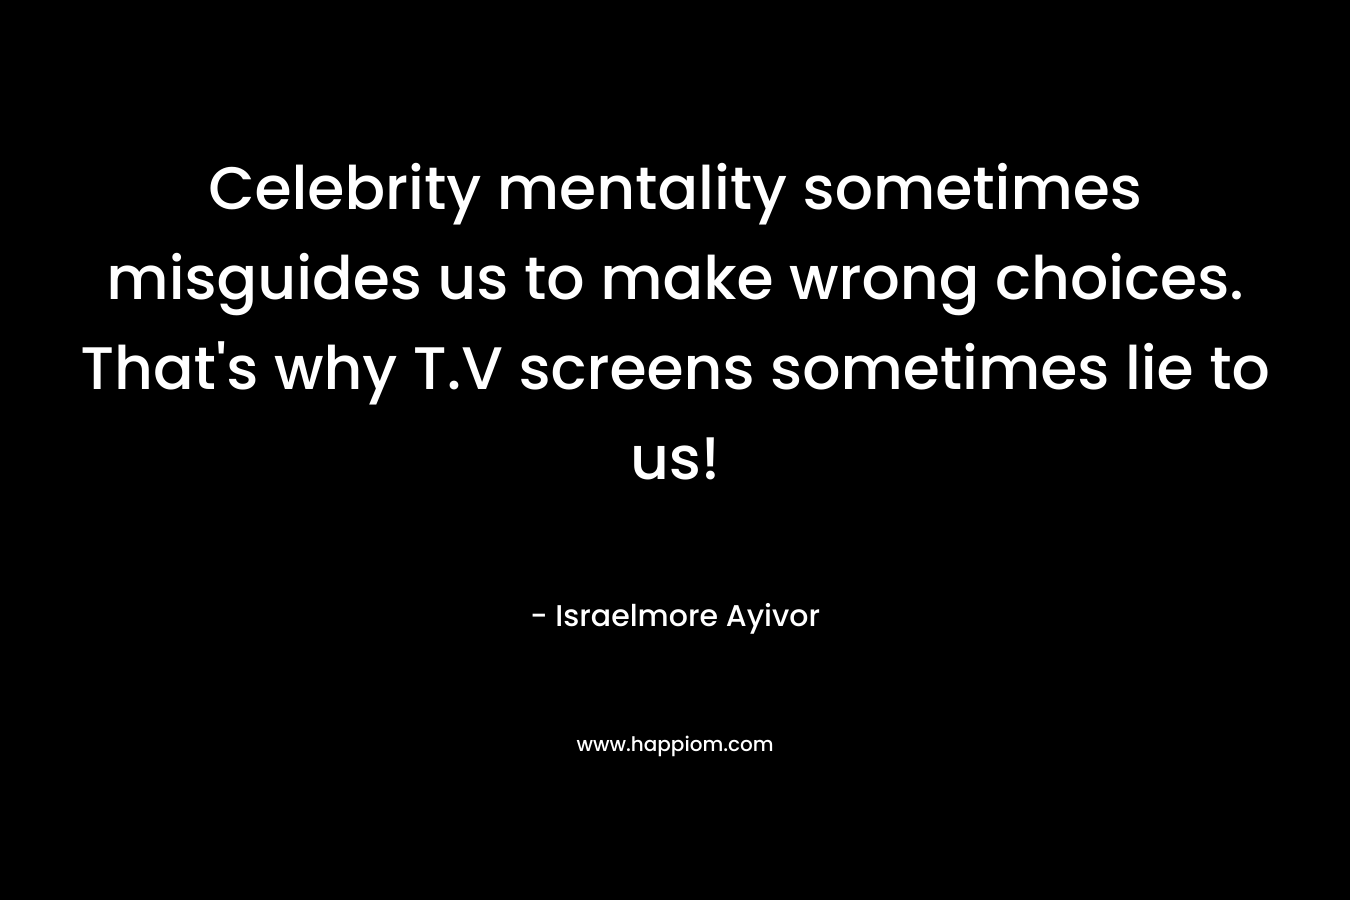 Celebrity mentality sometimes misguides us to make wrong choices. That's why T.V screens sometimes lie to us!